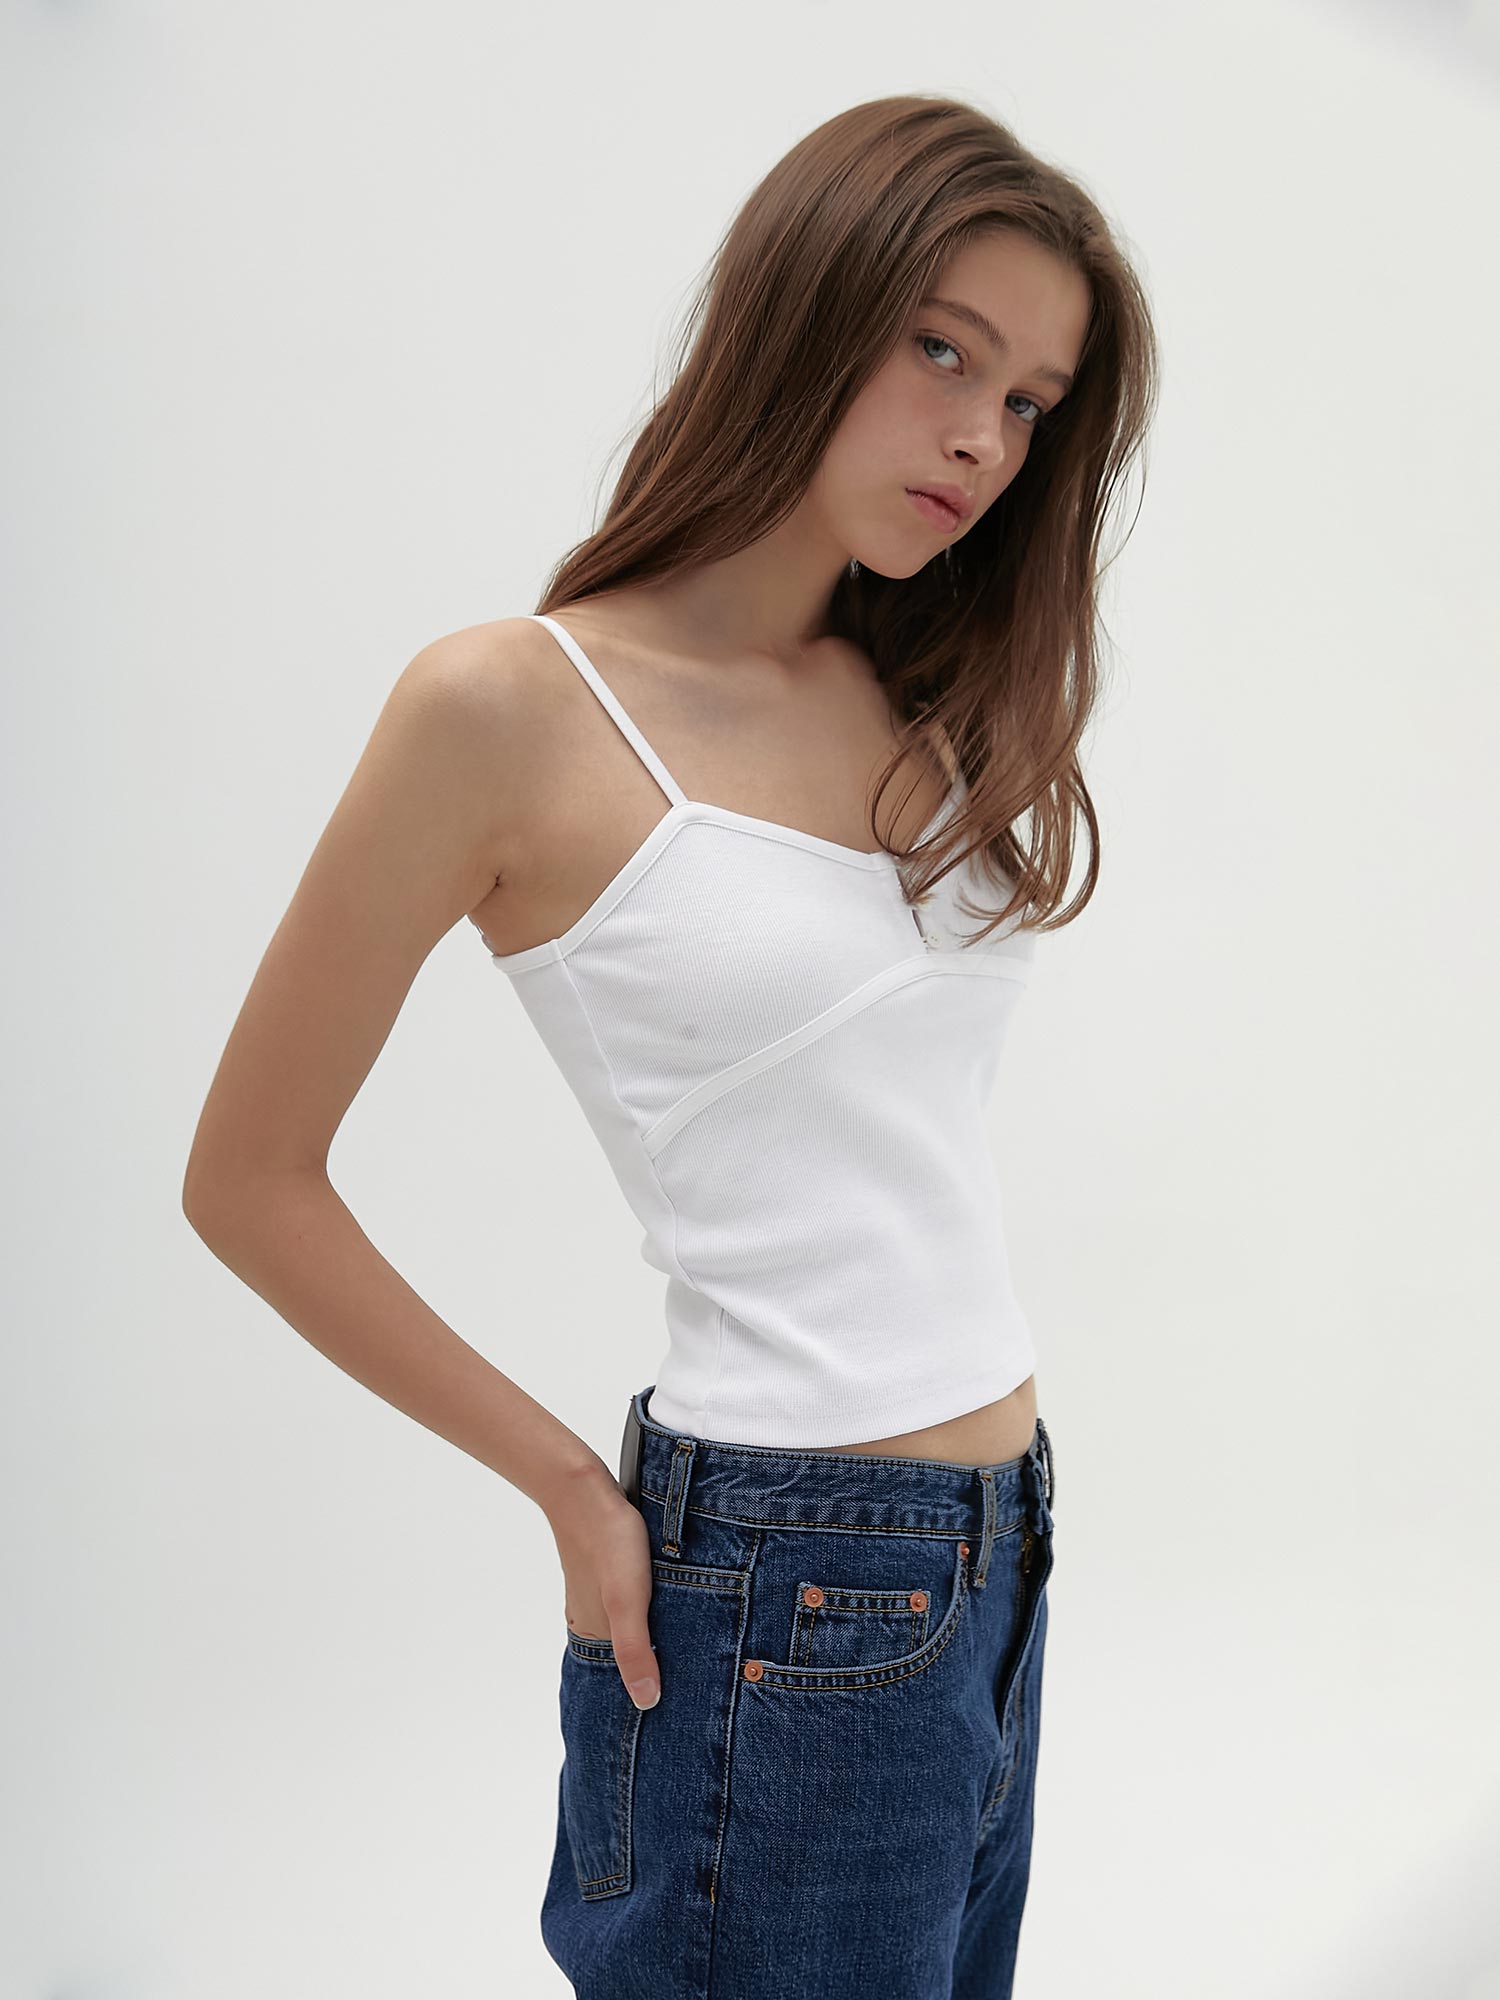 binding button camisole (white)